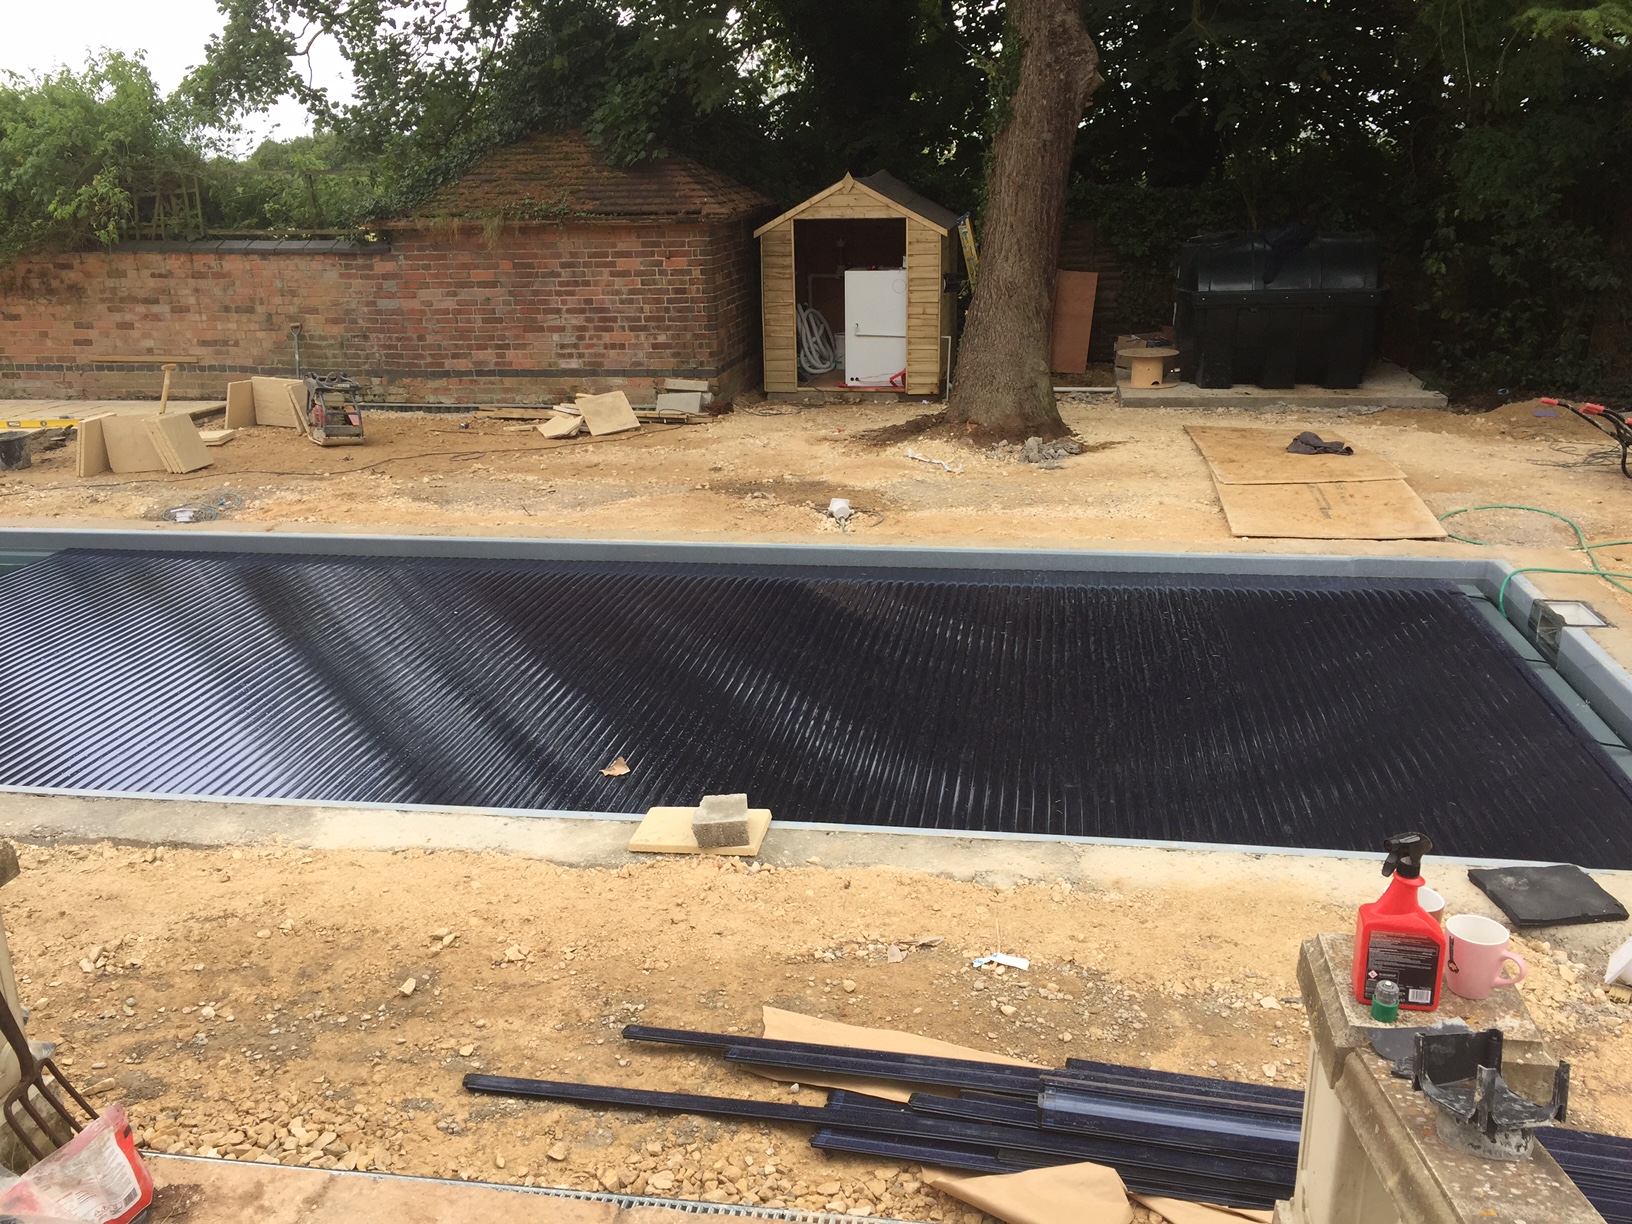 11m x 4m outdoor swimming pool in 3 weeks (with paving) - Page 61 - Homes, Gardens and DIY - PistonHeads